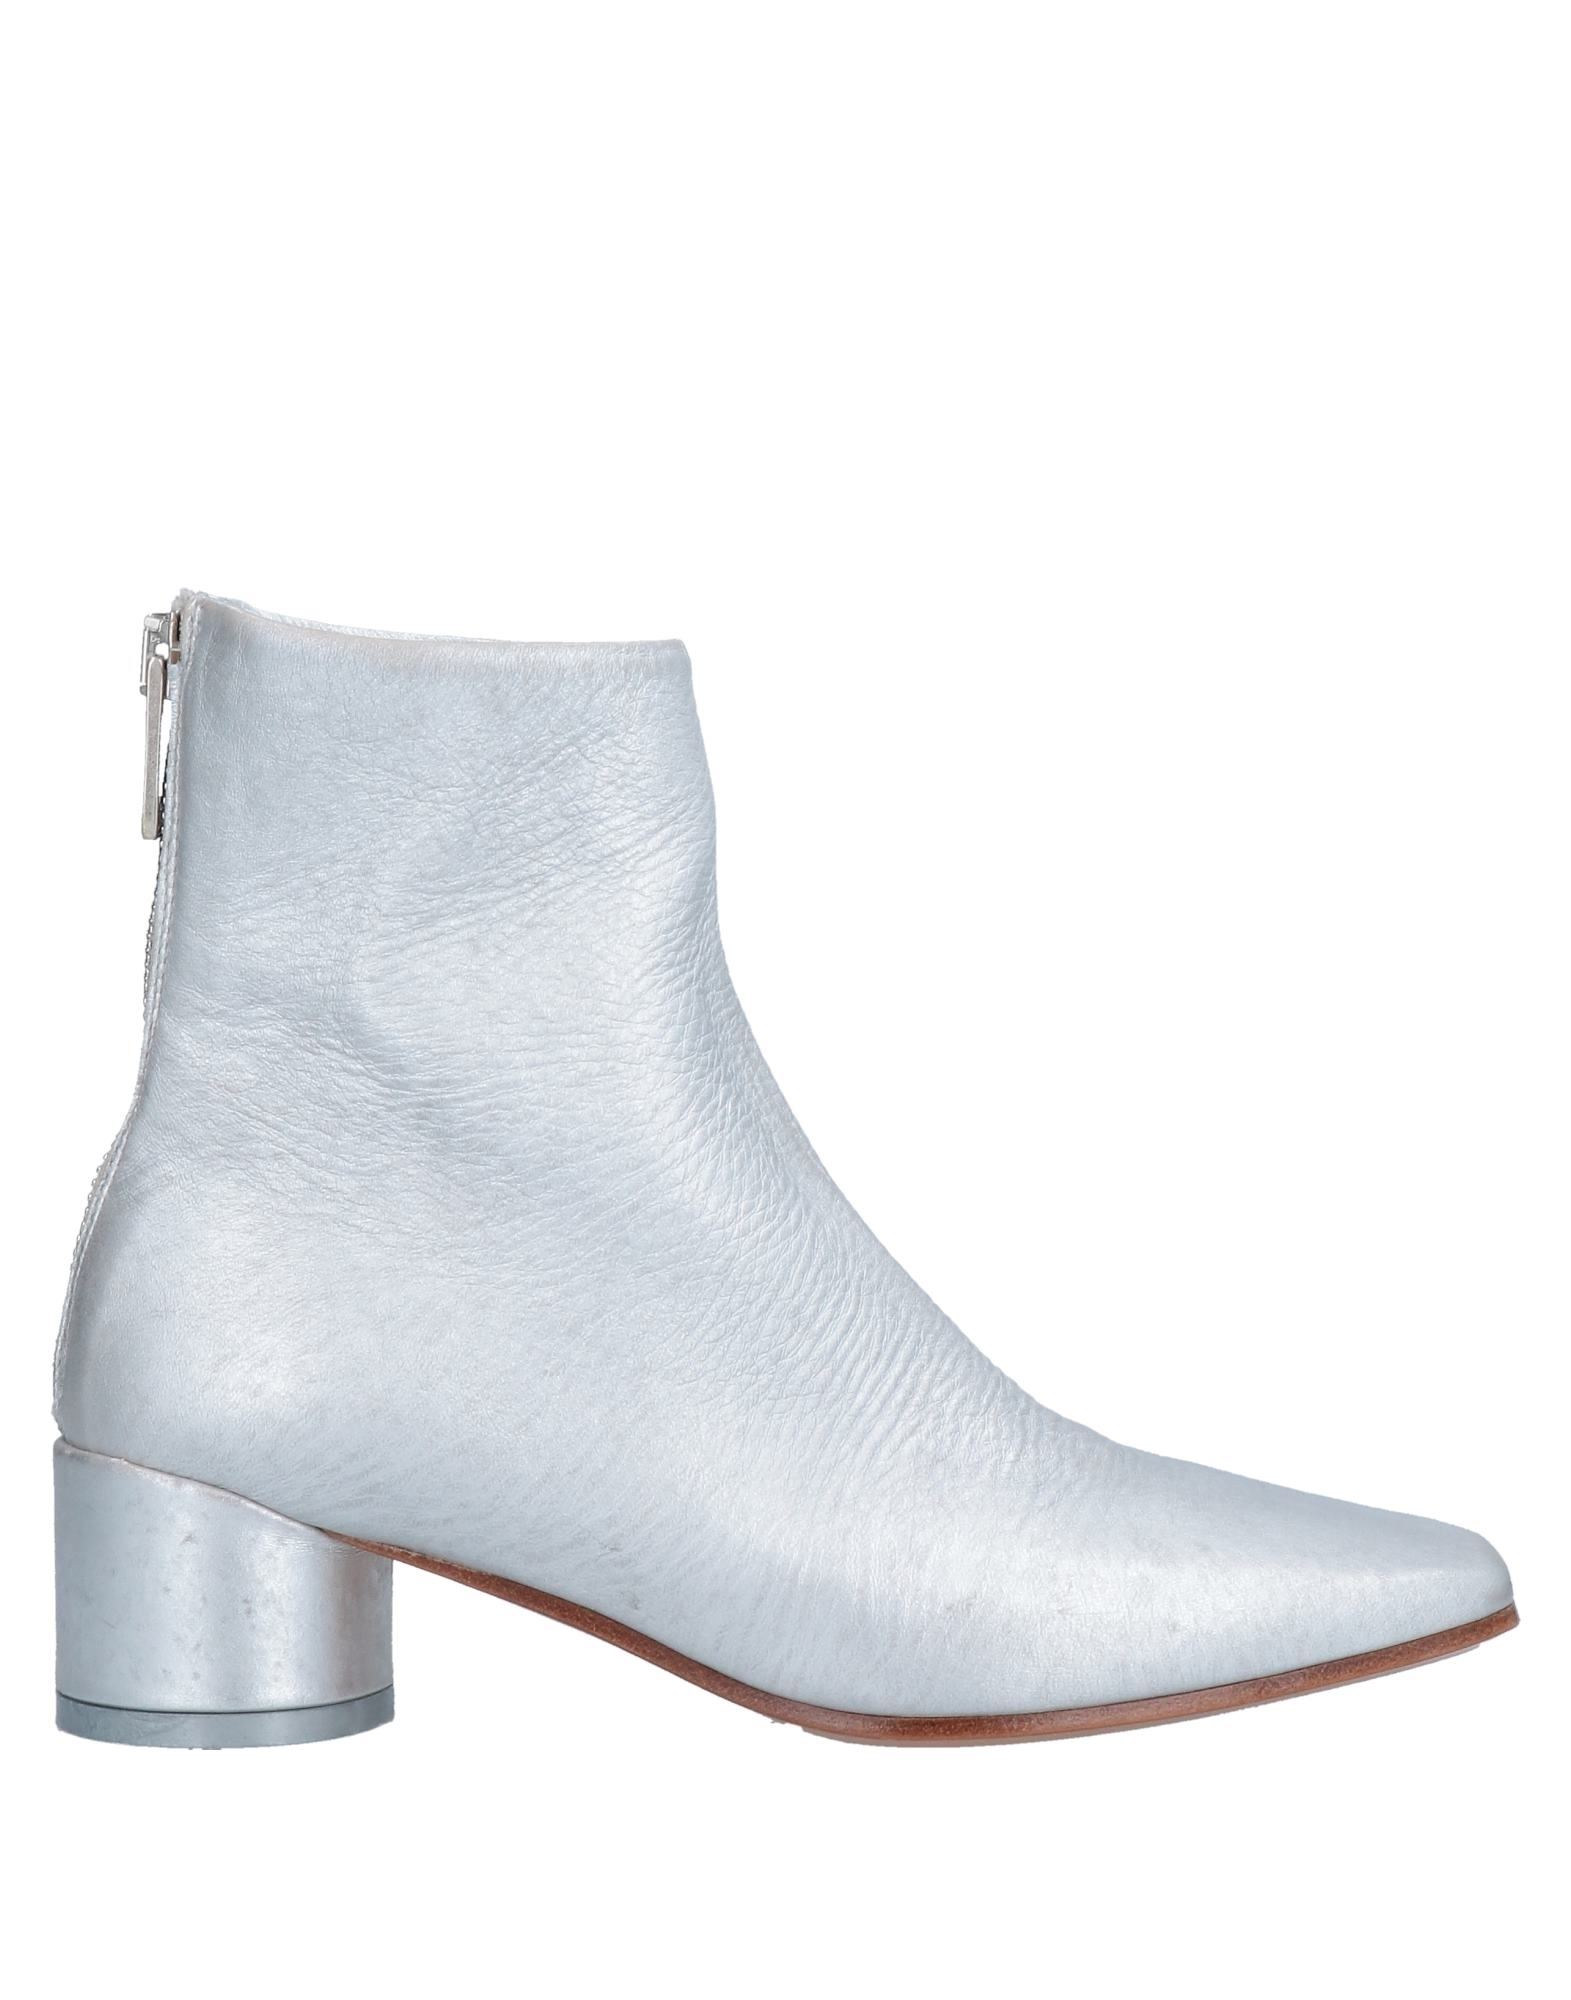 Mm6 Maison Margiela Ankle Boots In Silver | ModeSens